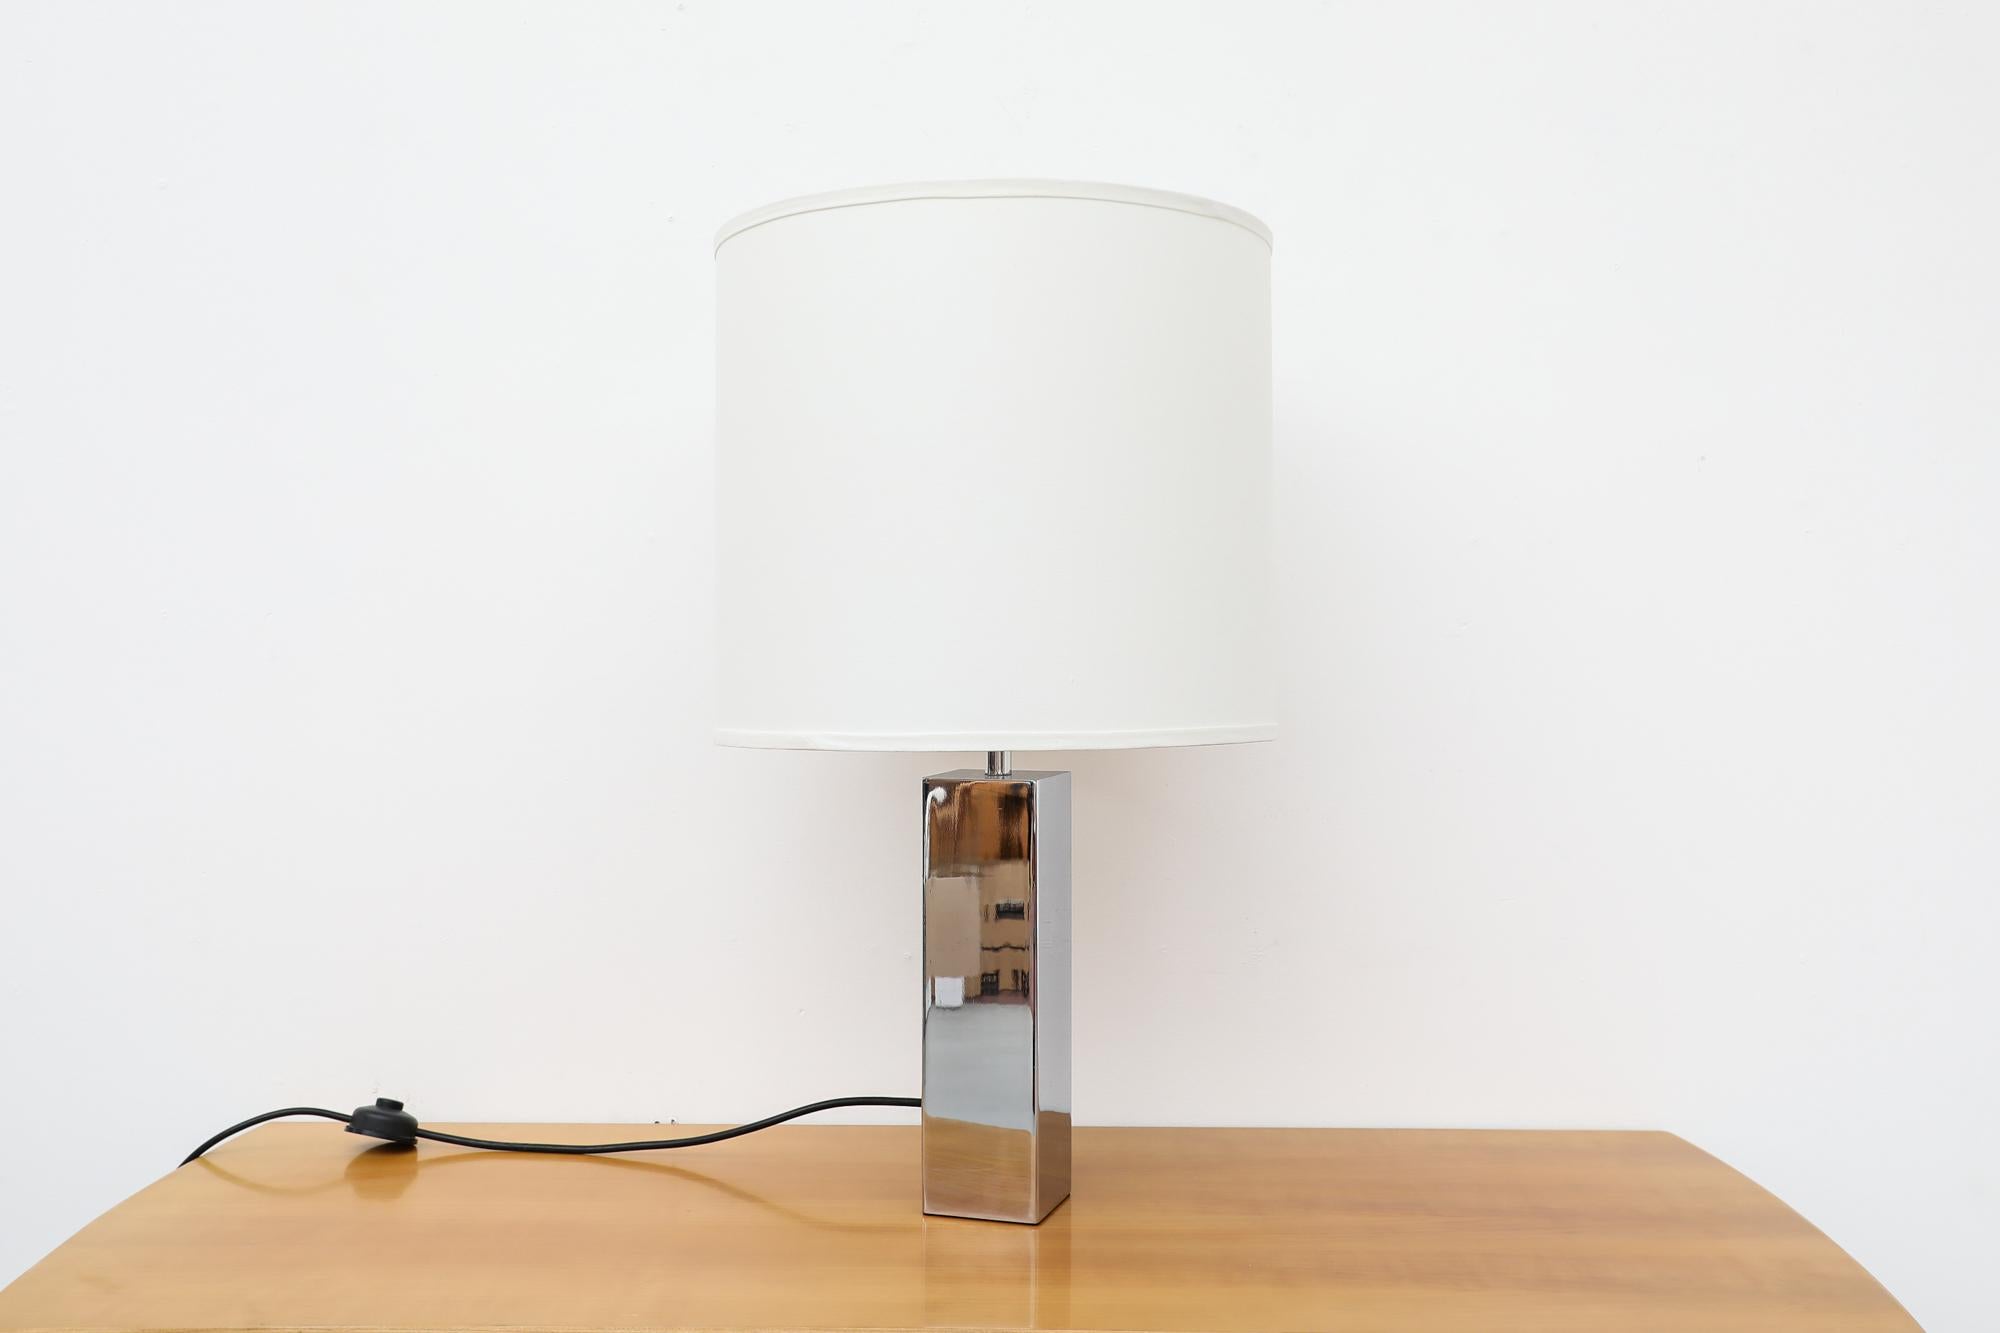 Stunning Mid-Century Goffredo Reggiani designed table lamp for Reggiani. Polished square chrome column base with dual sockets providing two lighting levels and well balanced illumination. A classically styled 1960s modernist table lamp with new